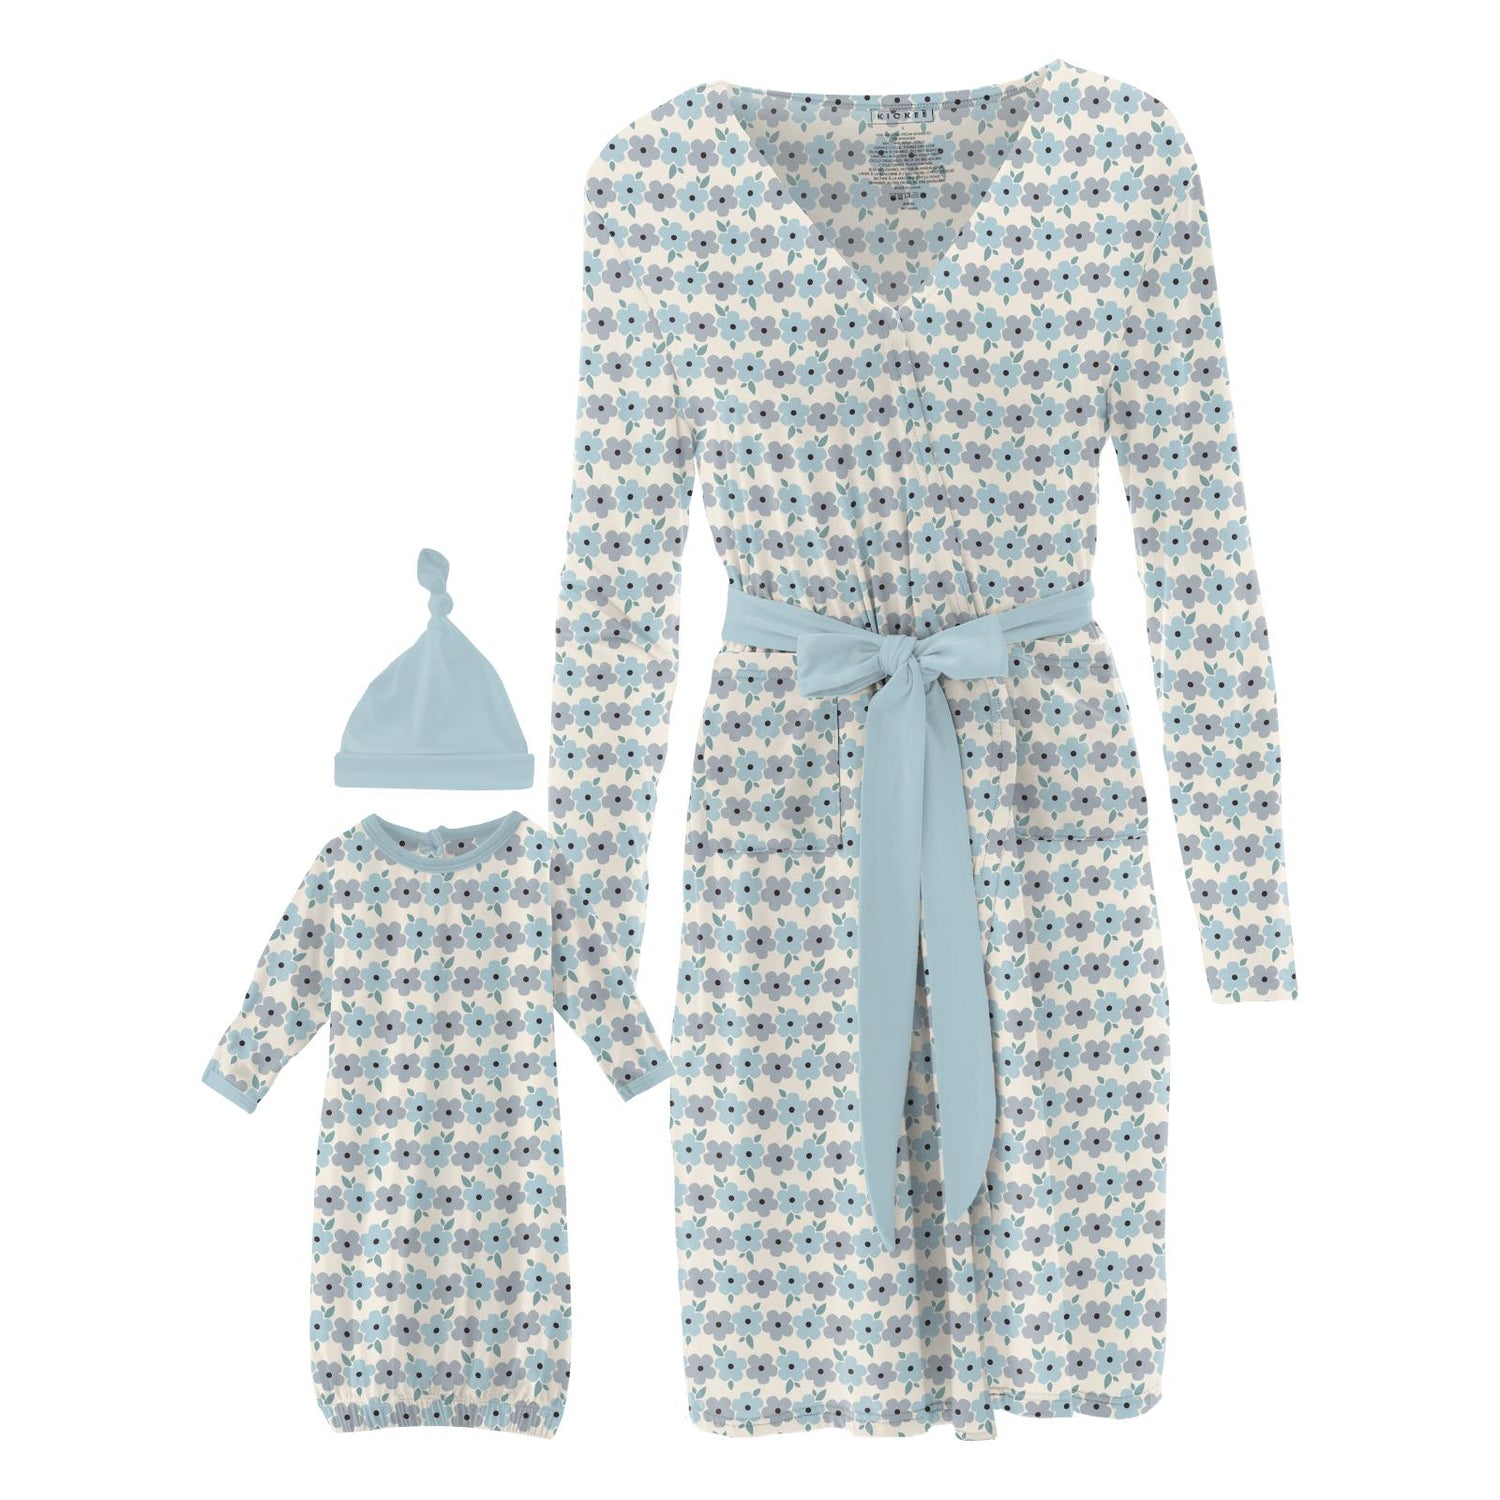 Women's Mid Length Lounge Robe & Layette Gown Set in Natural Hydrangea